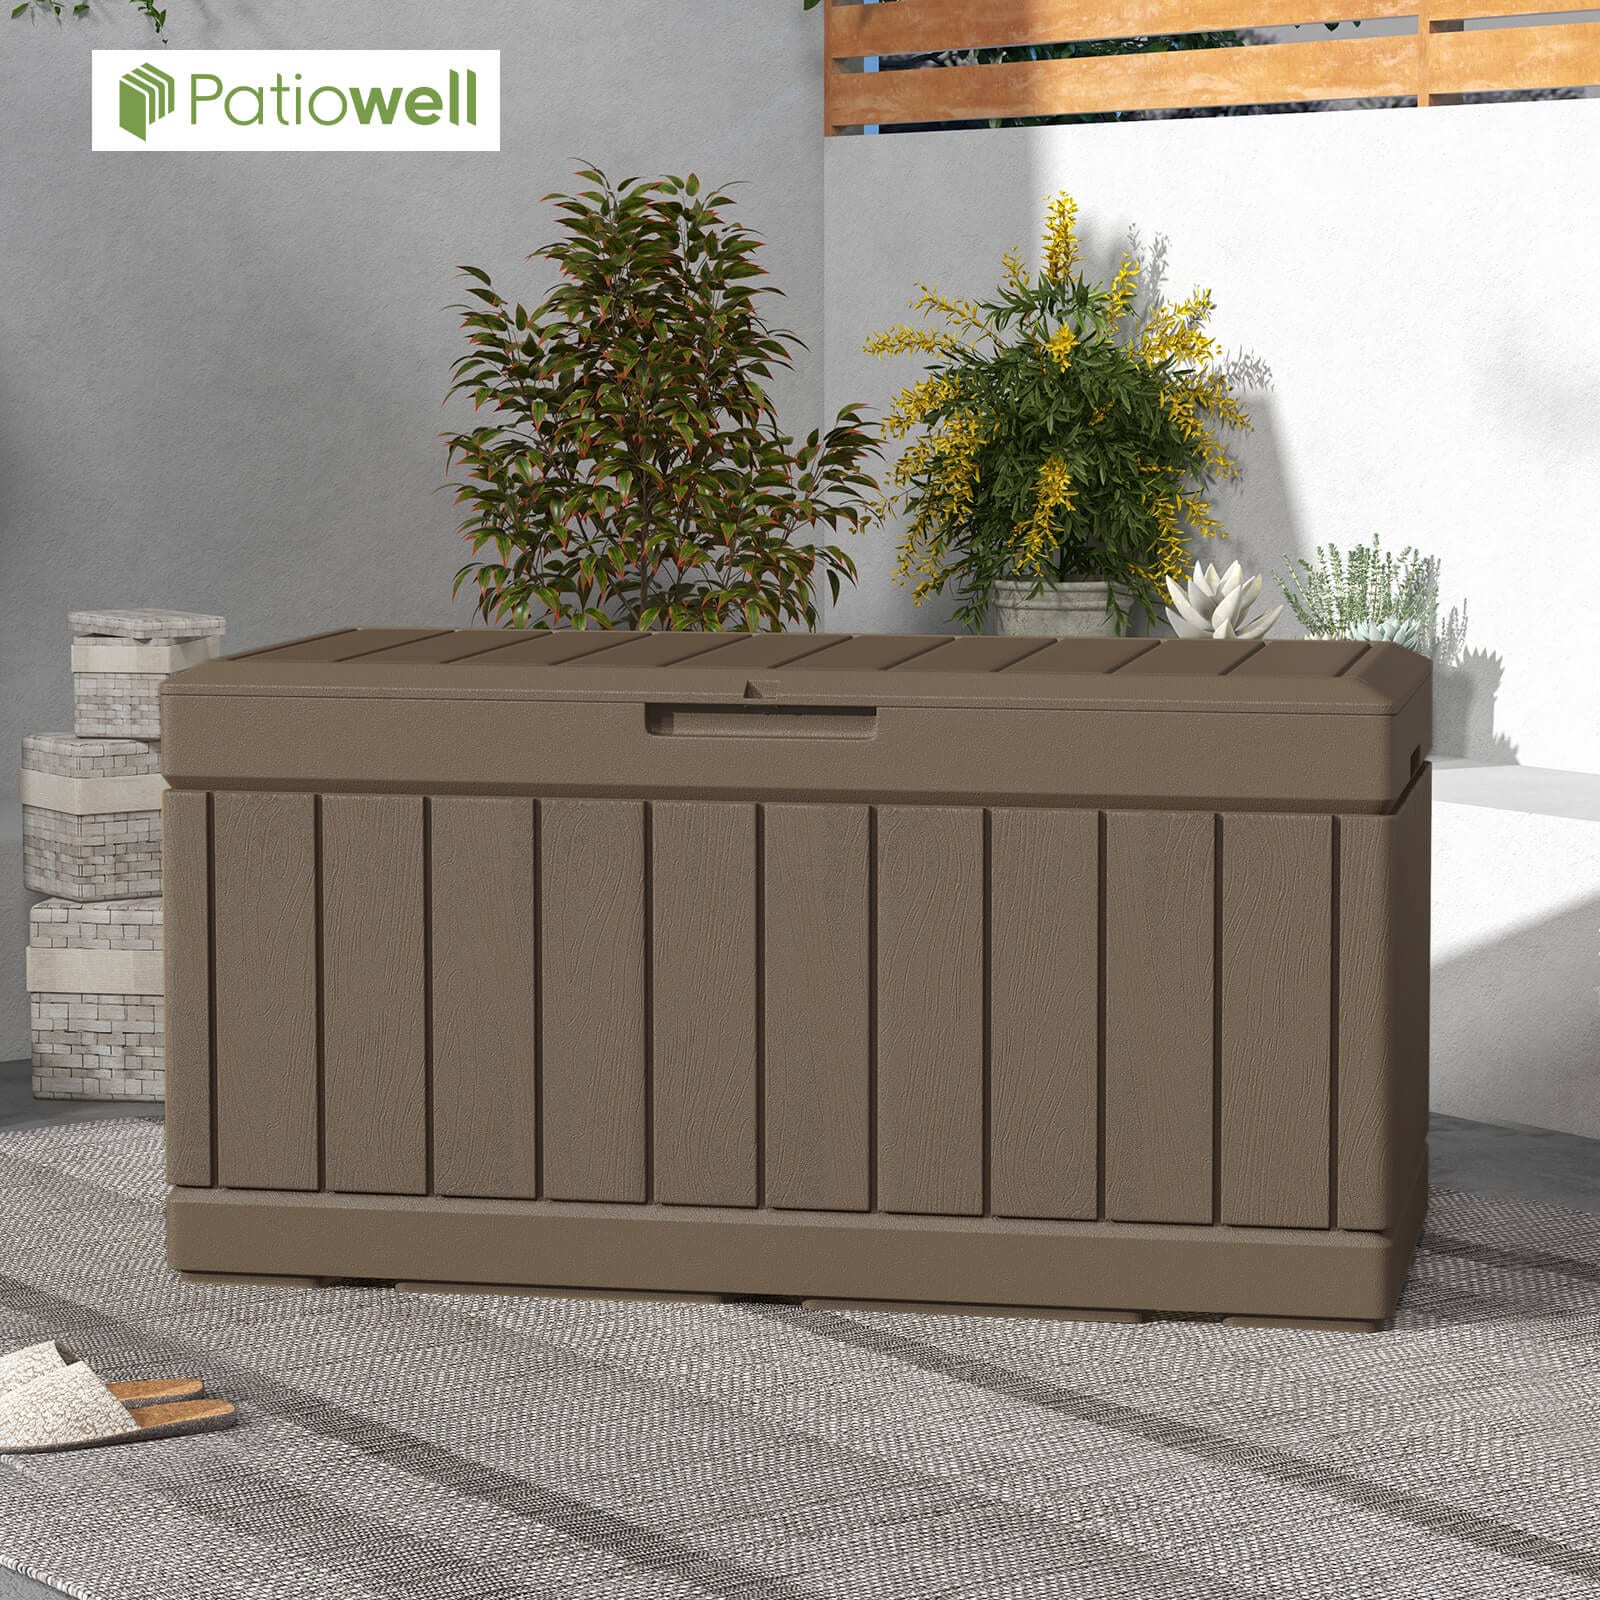 Patiowell 46.4-in L x 20.8-in 82-Gallons Brown Plastic Deck Box in the ...